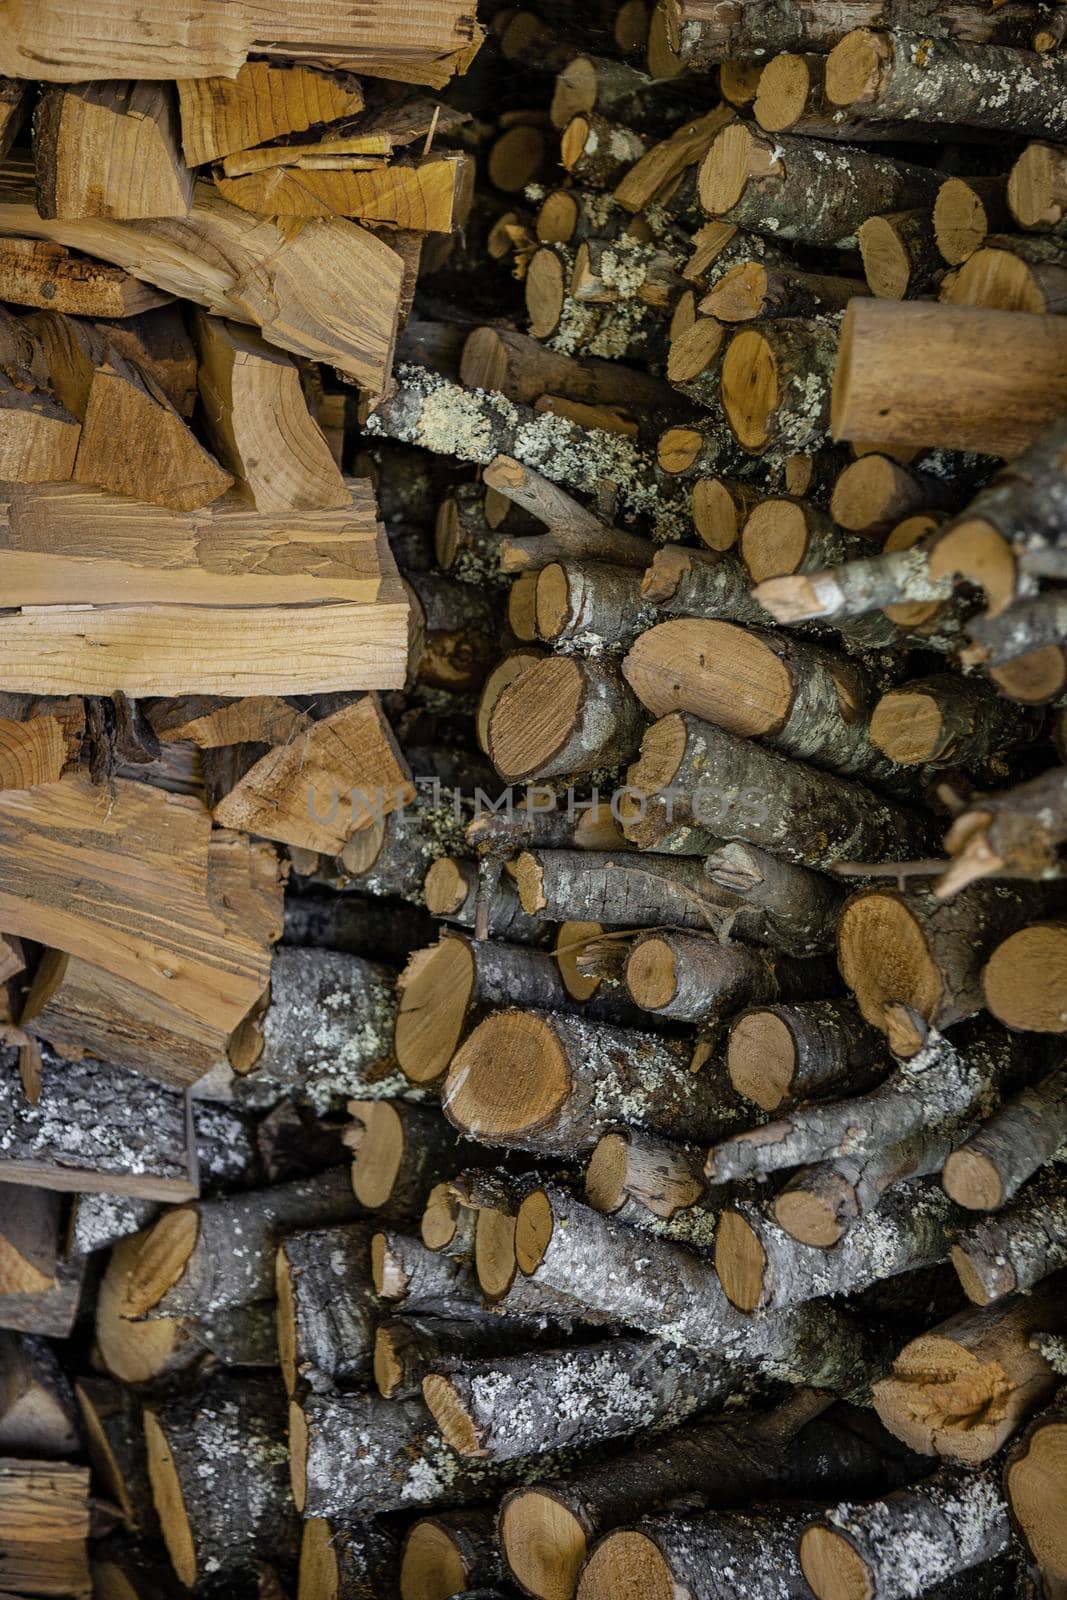 Wood logs drying in the farm shed